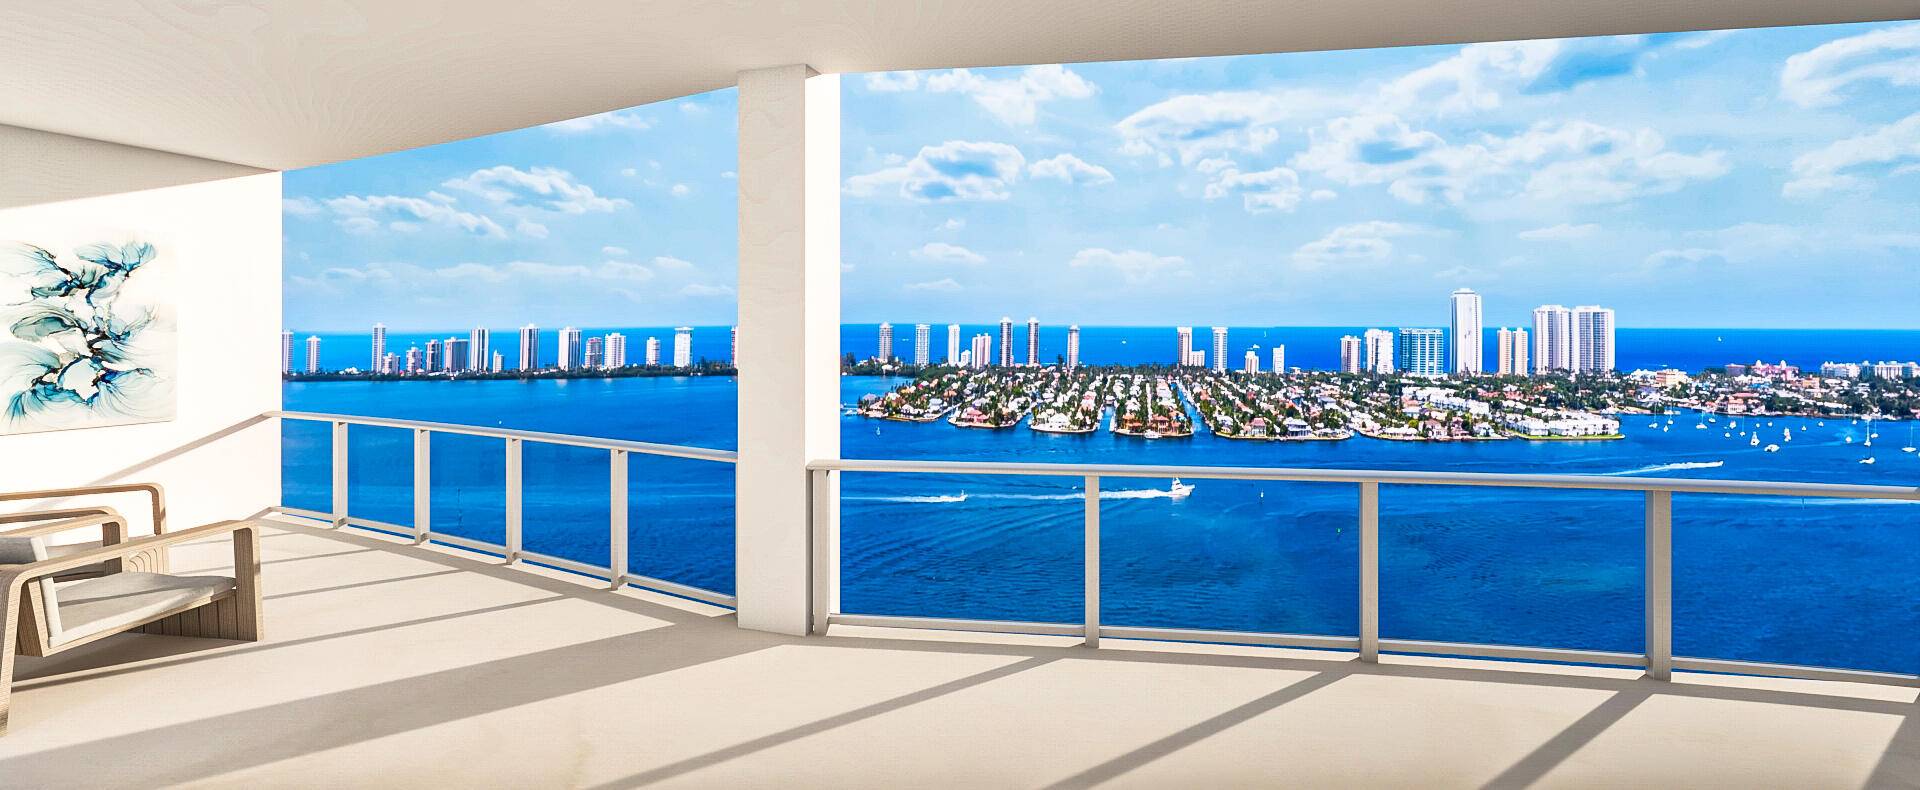 Nautilus 220 is a new luxe waterfront development under construction alongside a marina with 330 condominium residences in two, 24 story towers, a one acre outdoor amenity deck, the SeaHawk ...